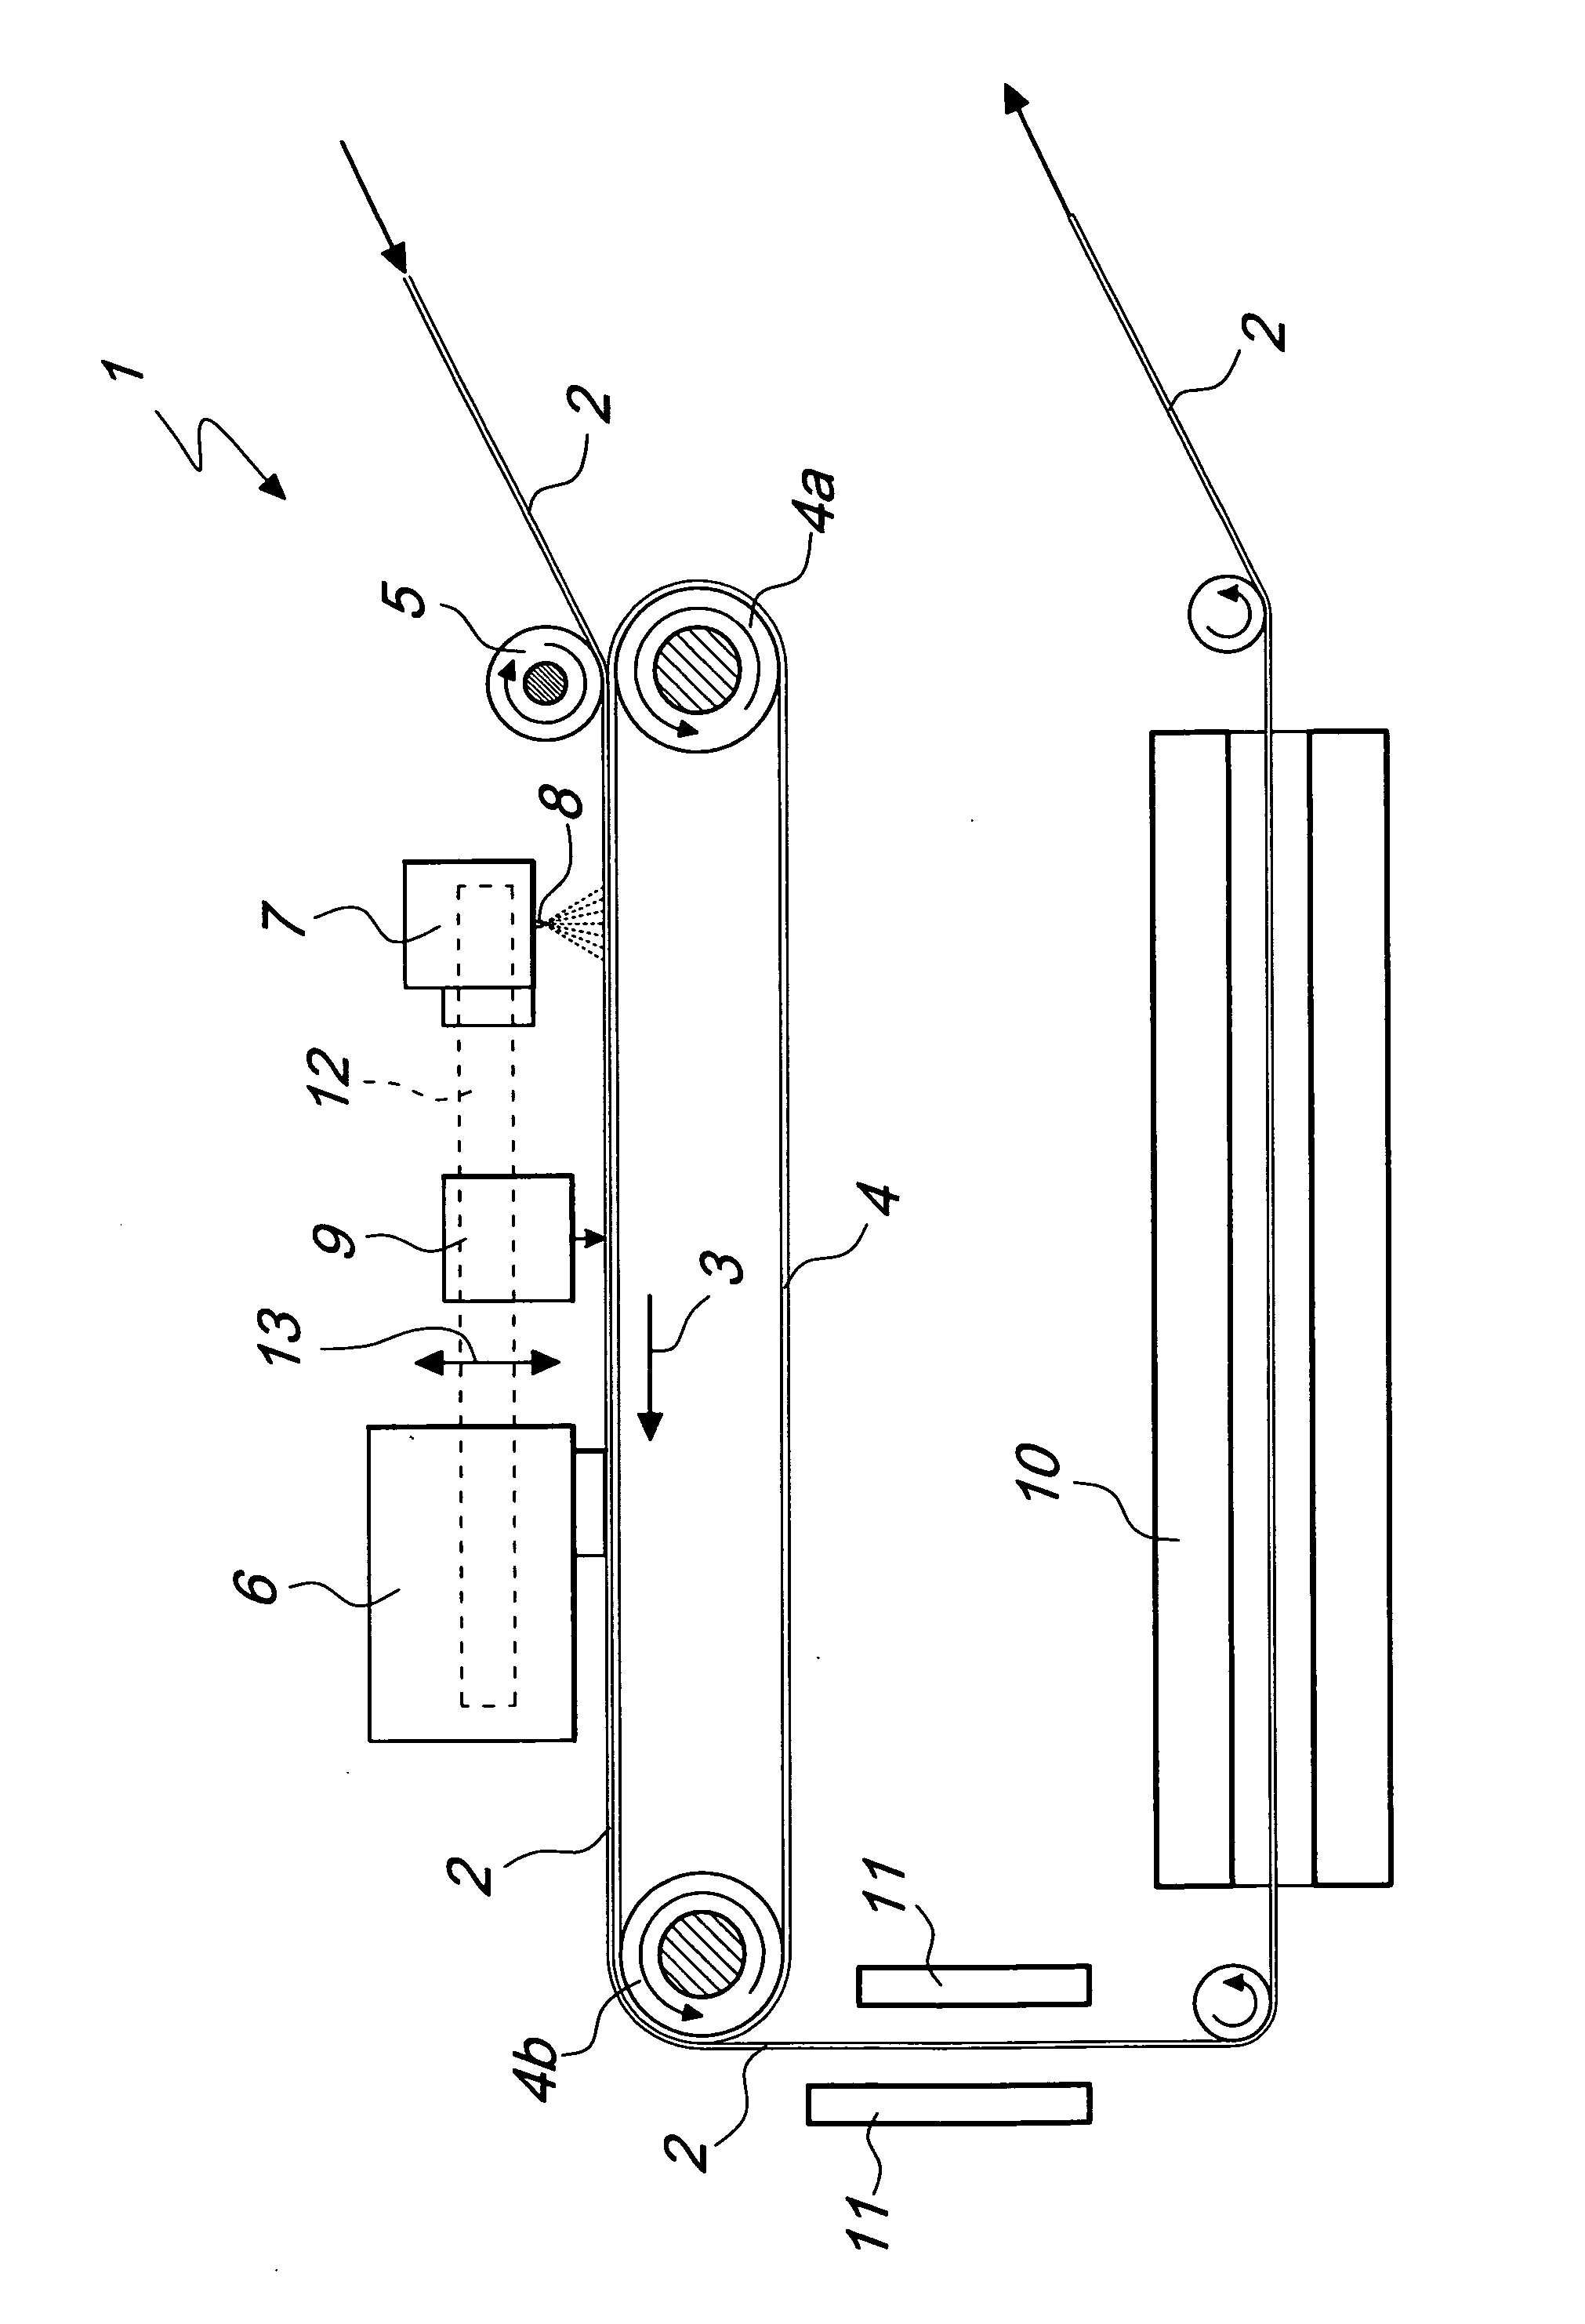 Method and apparatus for digital inkjet printing of materials, particularly sheet-like materials such as fabrics, hides or the like